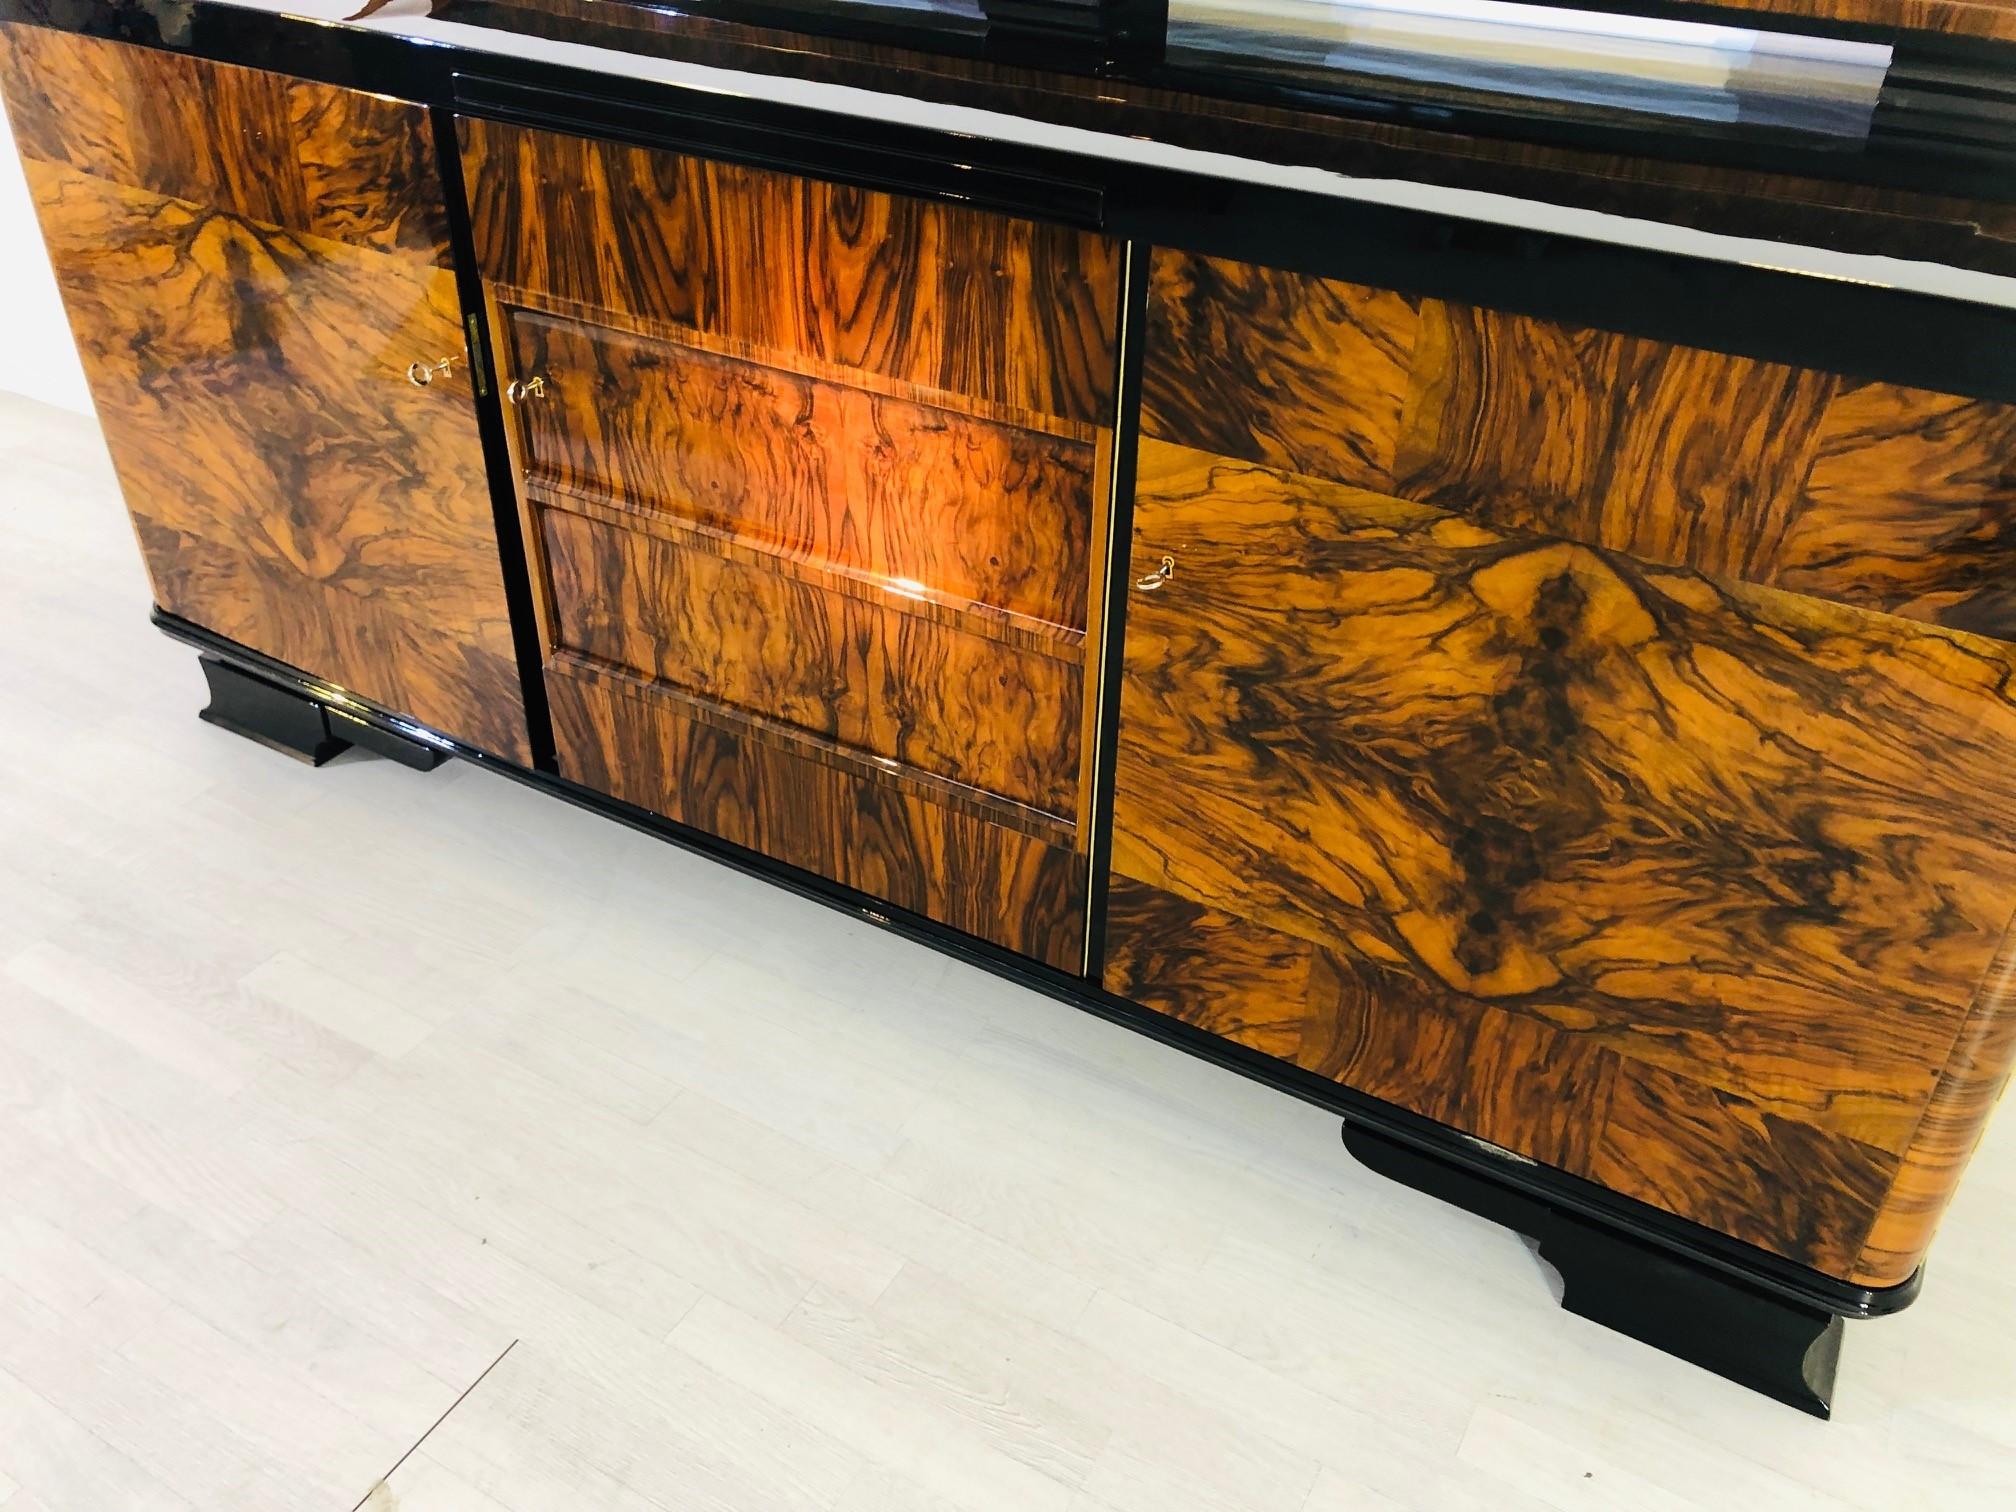 Original Art Deco large sideboard or buffet with a beautifully winged hutch on the buffet top. Convinces with its stunning body with amazing Caucasian walnut burl, layed out perfectly bookmatched on the outer doors. Restored to a perfect condition